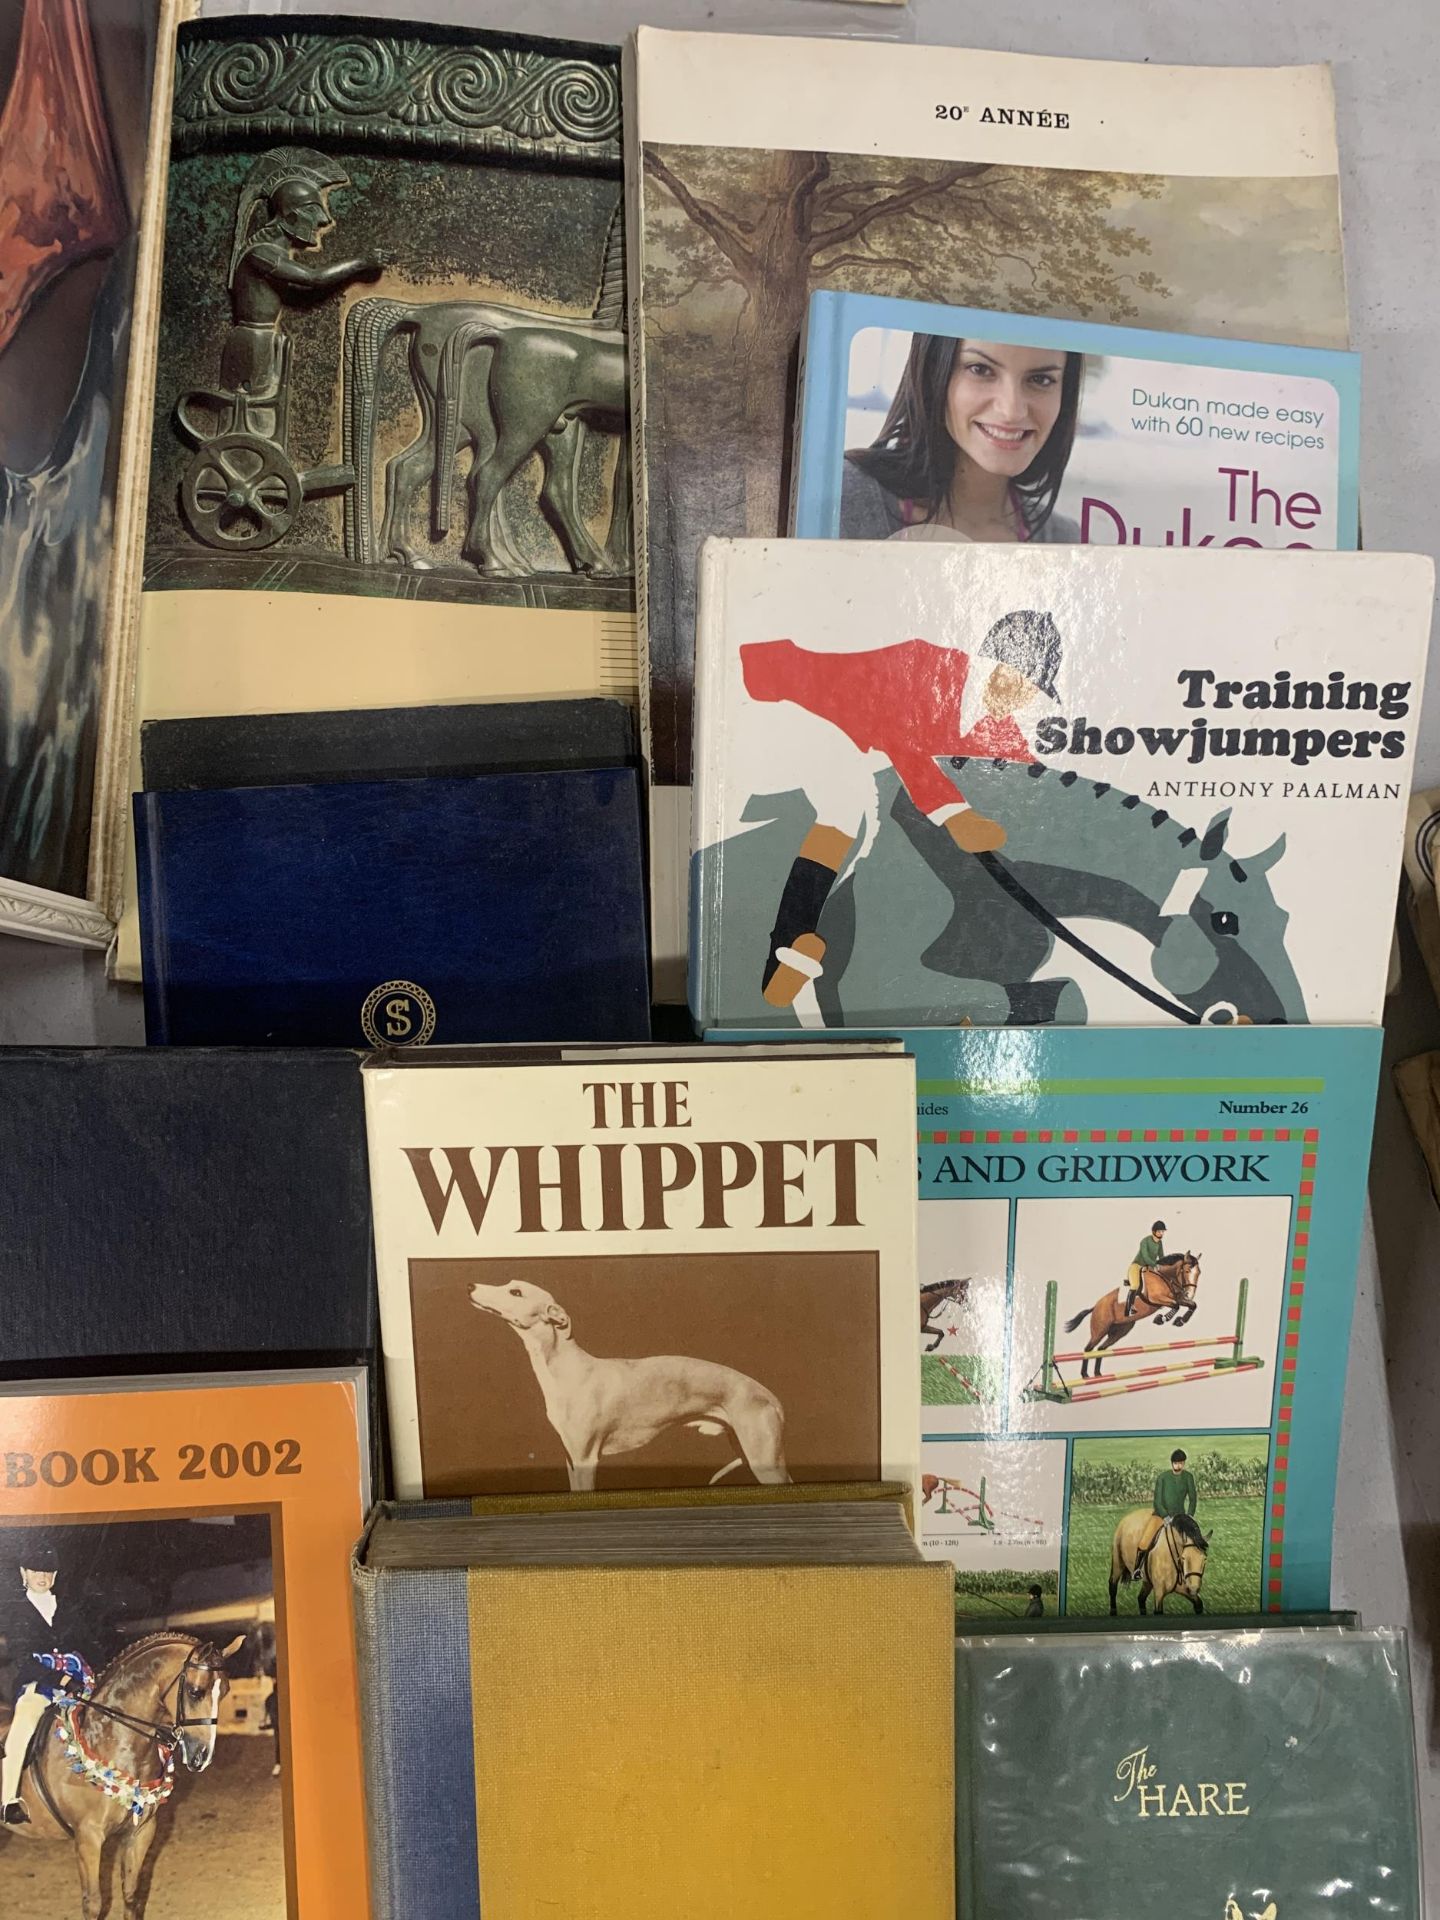 A GROUP OF BOOKS RELATED TO HORSE RIDING, SHOW JUMPING ETC - Image 2 of 3